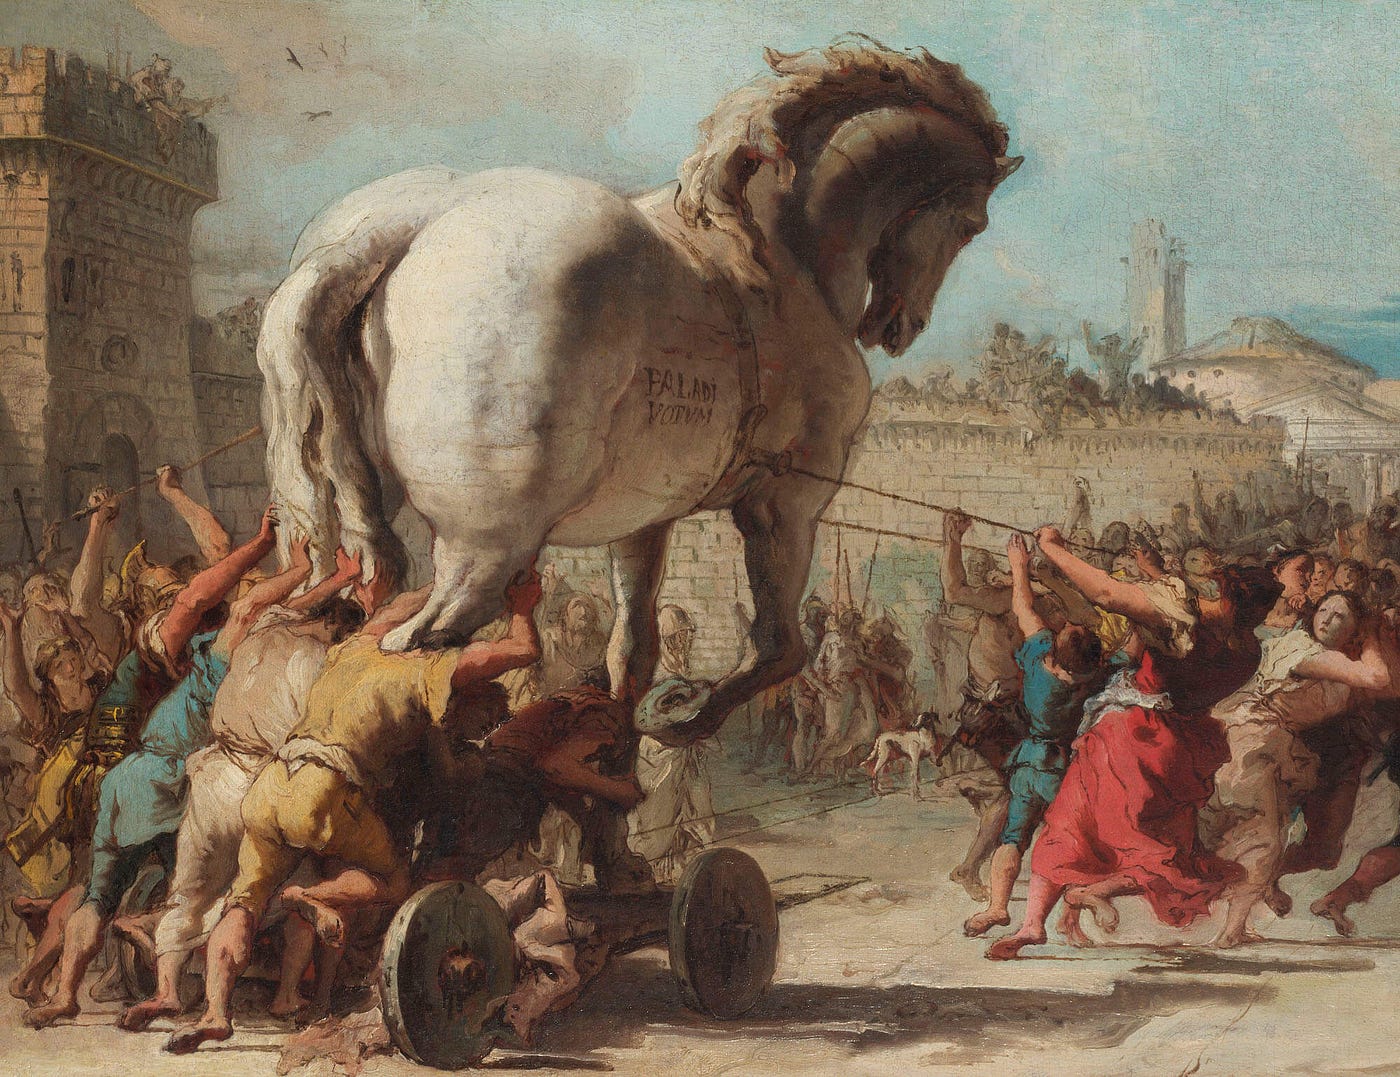 State-Backed Digital Currencies Are Like a Trojan Horse That Will